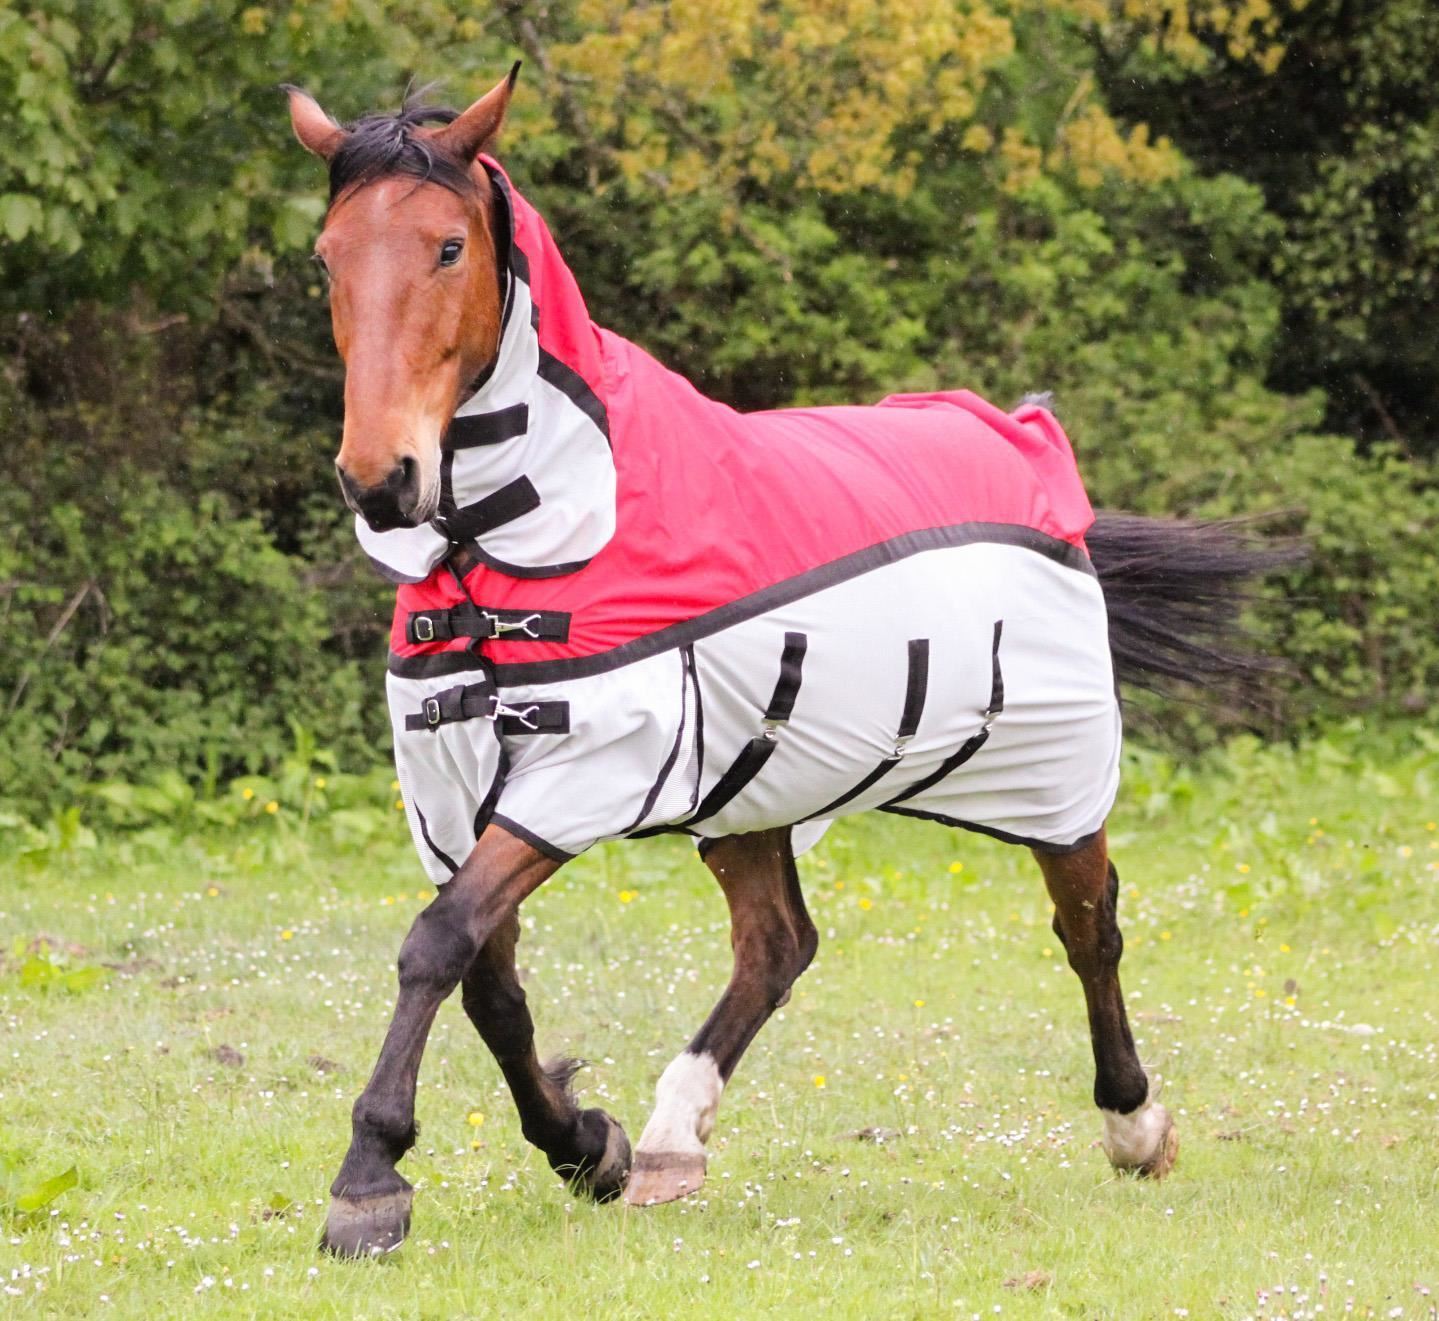 600D Lightweight 2 in 1 Combo Neck Fly Rugs for Horses Adjust Chest Belly 10Clrs - Tack24